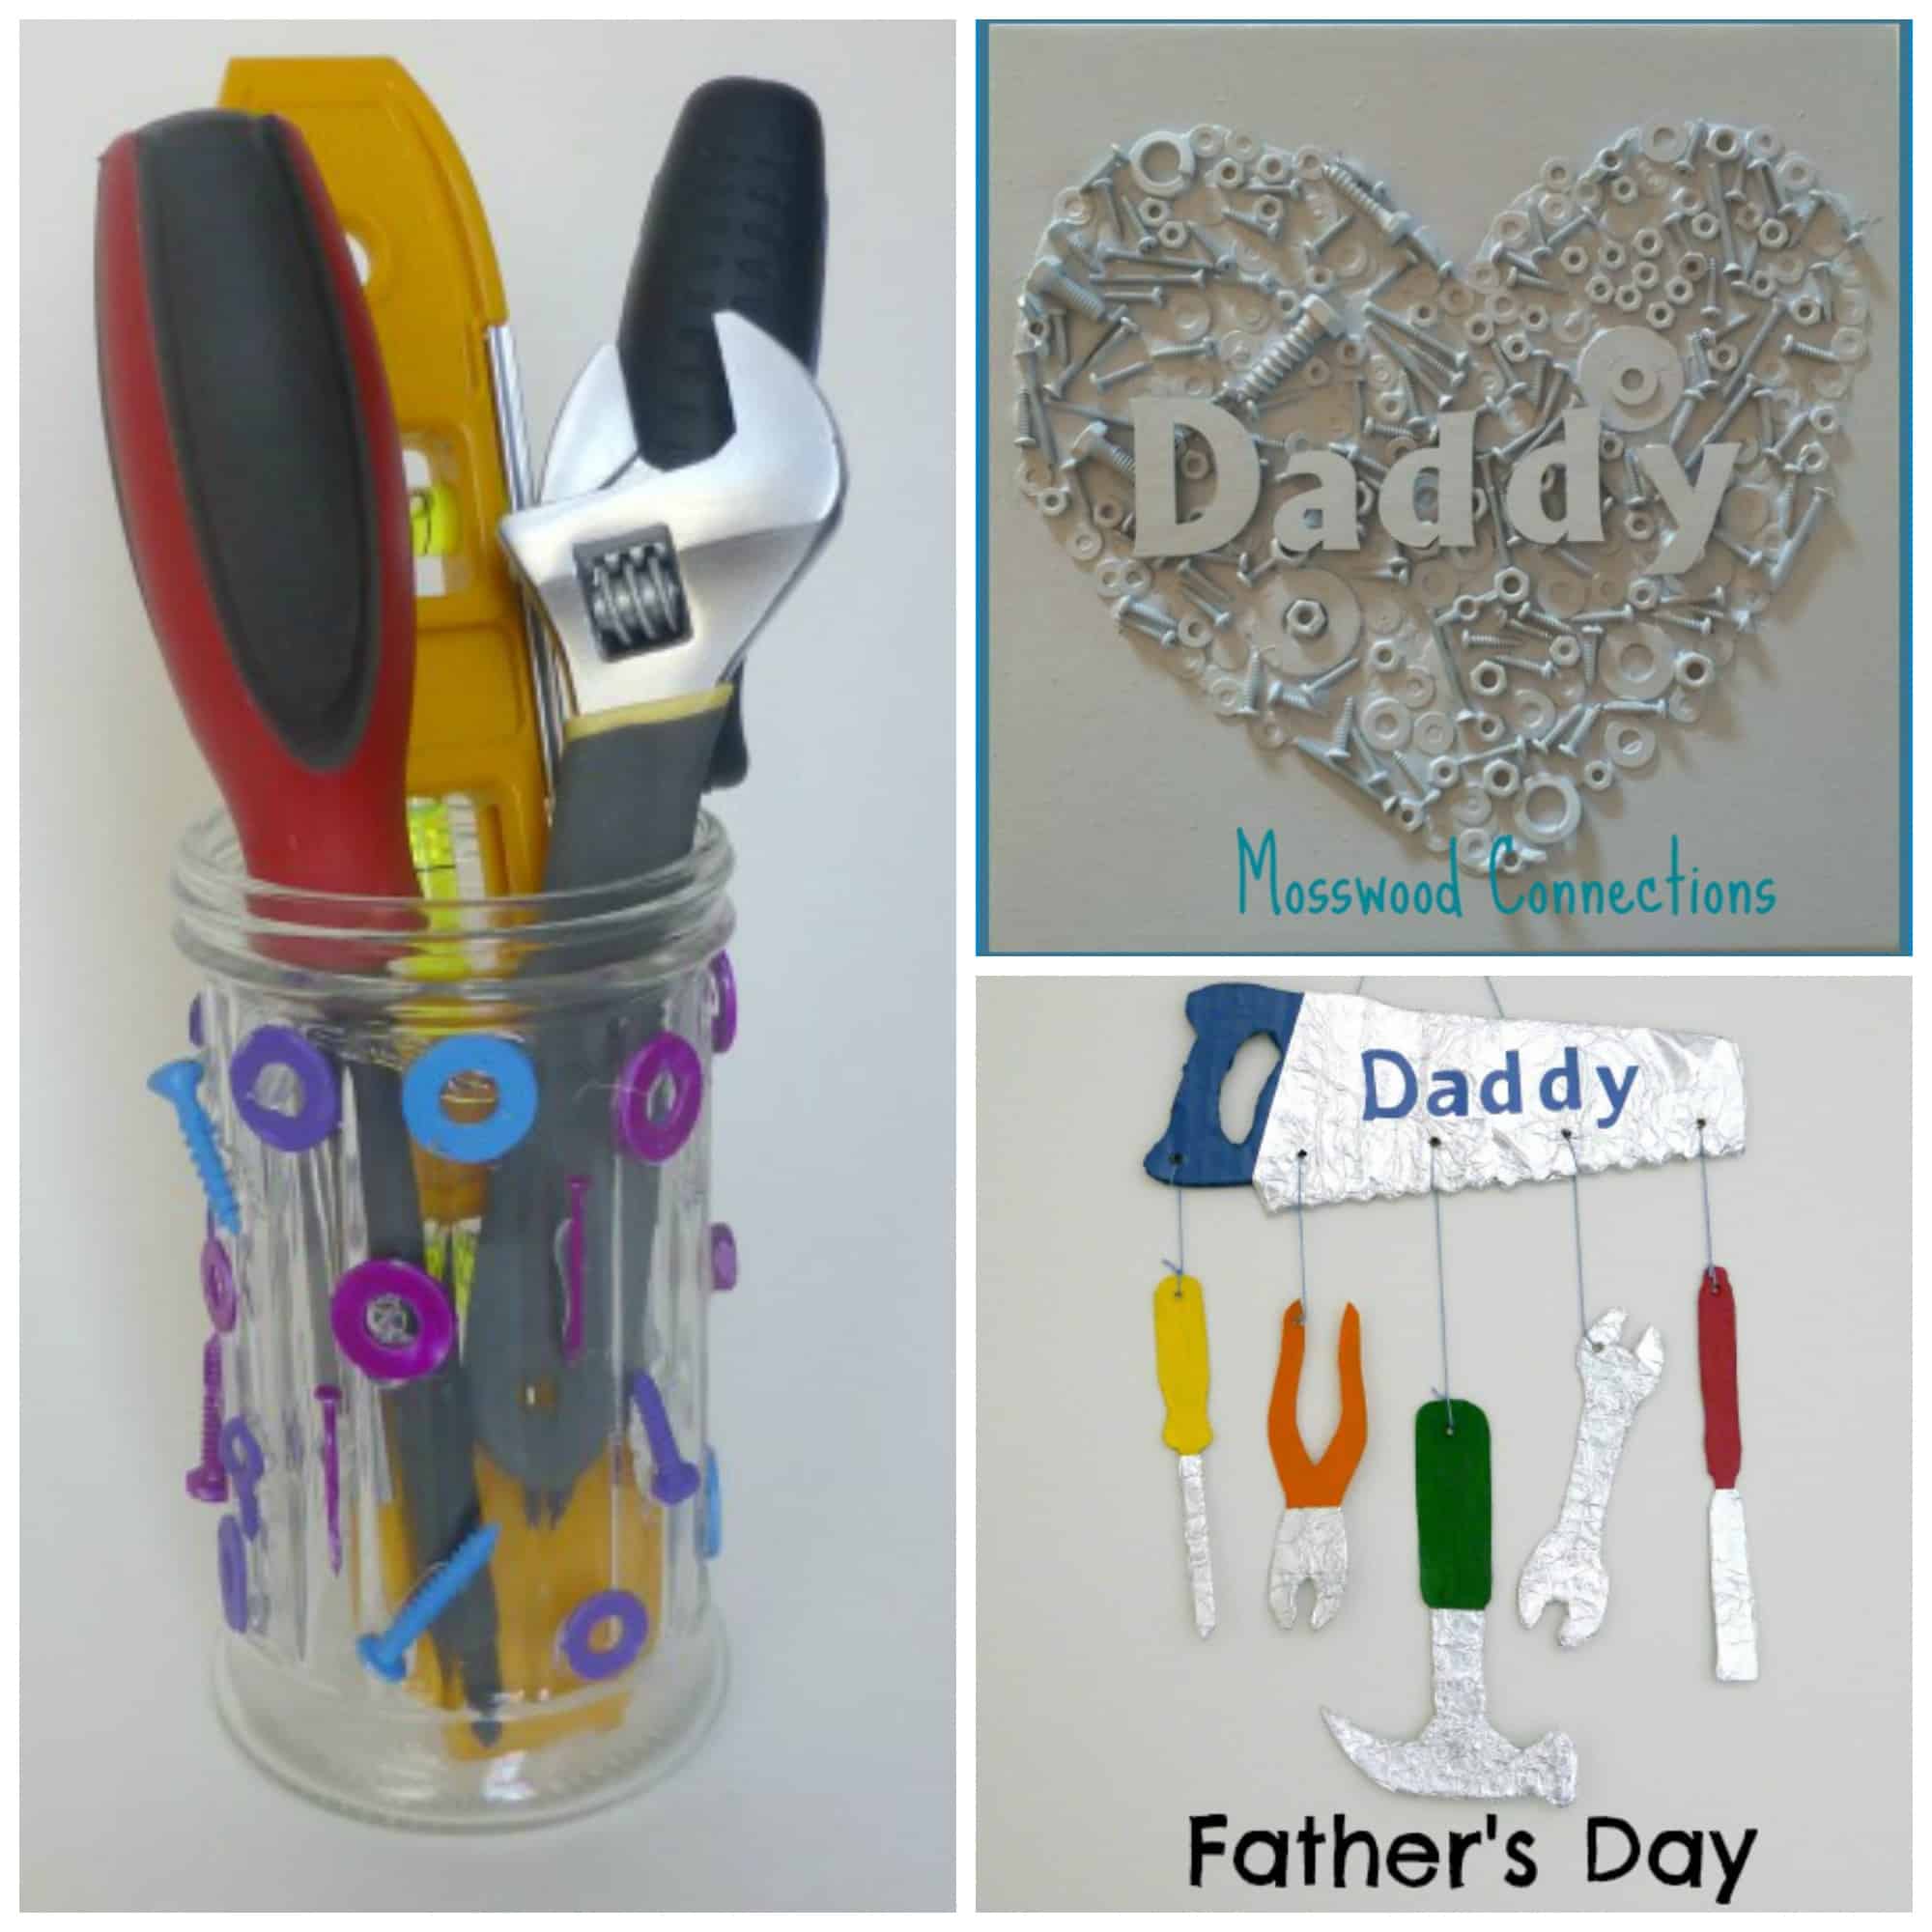 These father's day gifts are perfect for the tool lover! For the dad who has everything, they appreciate a homemade gift from their kids. These can all be kid made and are sure to warm the heart of any dad this father's day!